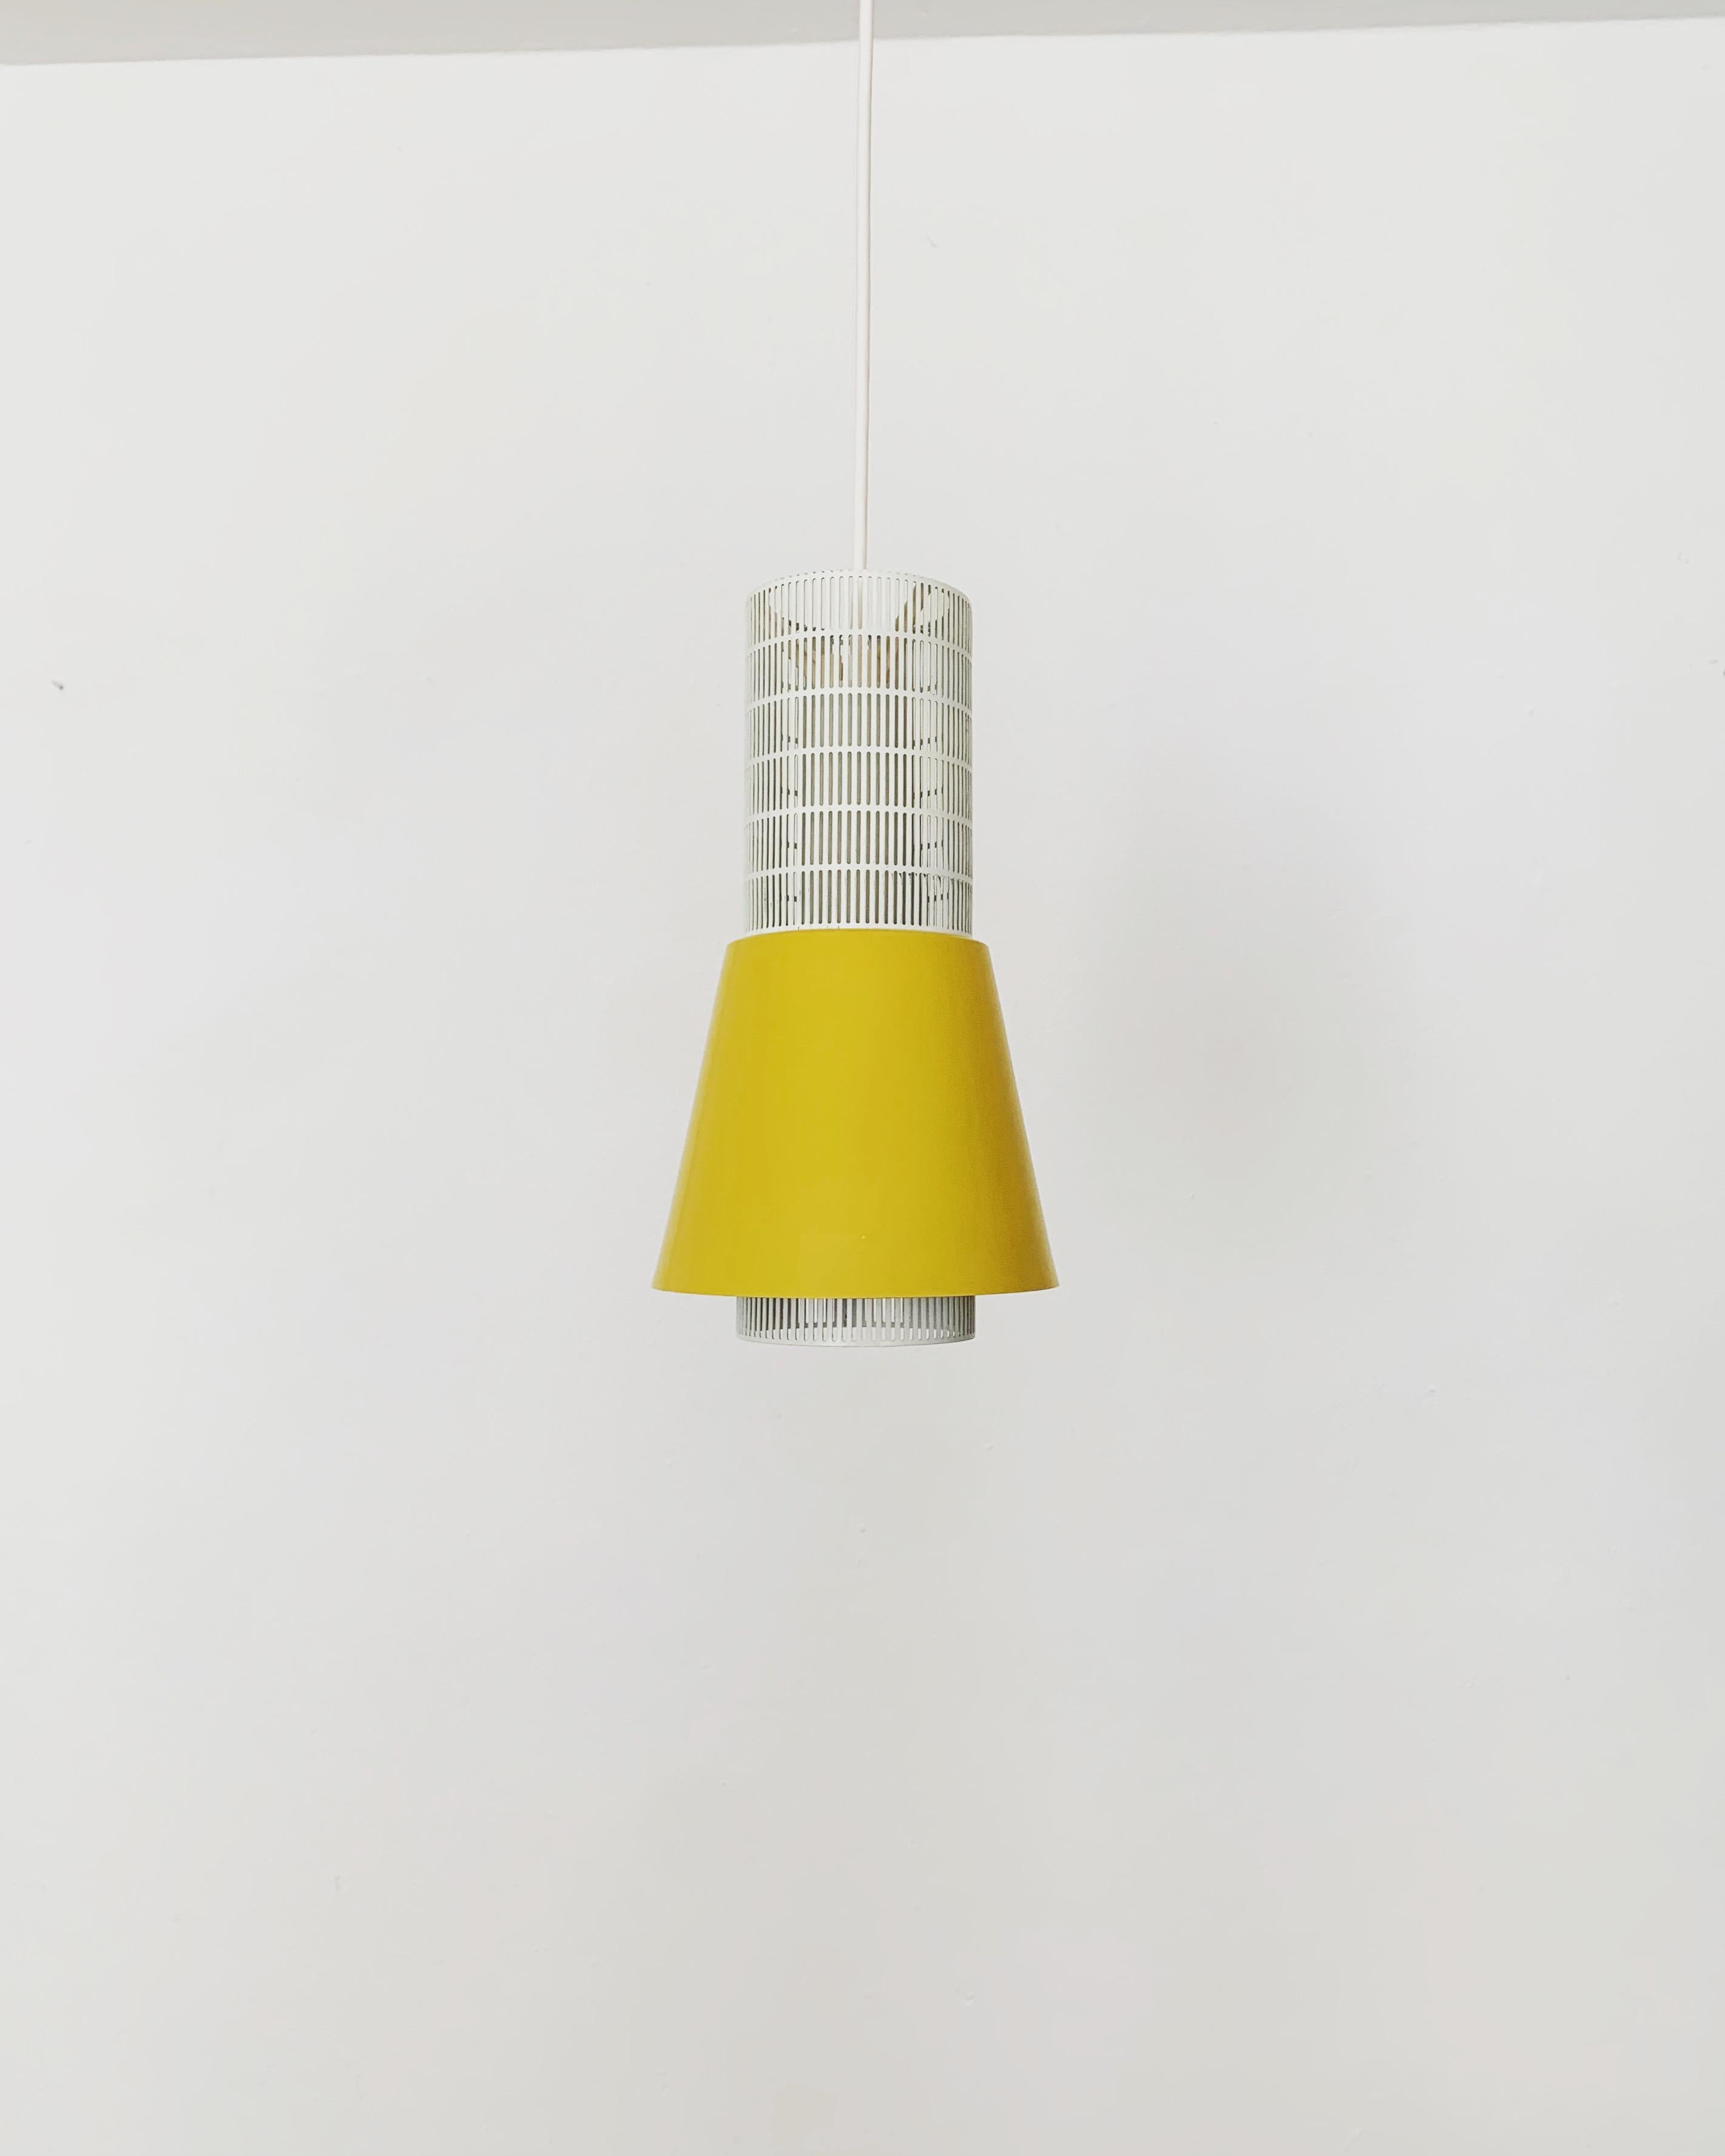 Very nice pendant lamp from the 1960s.
The lighting effect of the lamp is extremely beautiful. The design and the very beautiful details create a very noble and pleasant light.
The lamp creates a very cozy atmosphere and is of very high